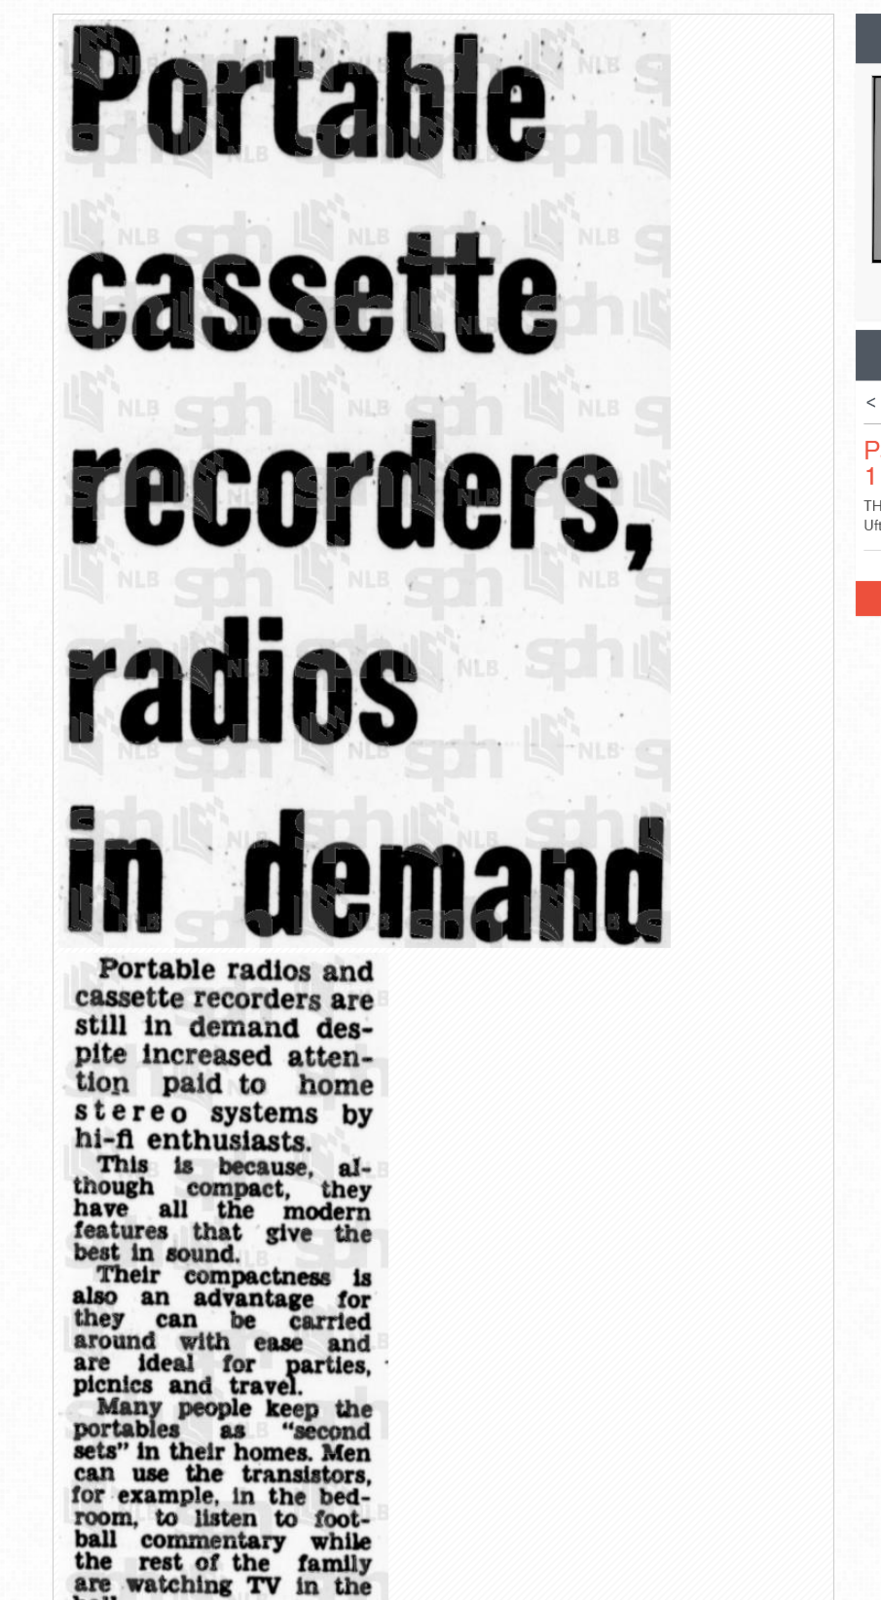 Portable cassette recorders, radios in demand, New Nation 1977 1.png